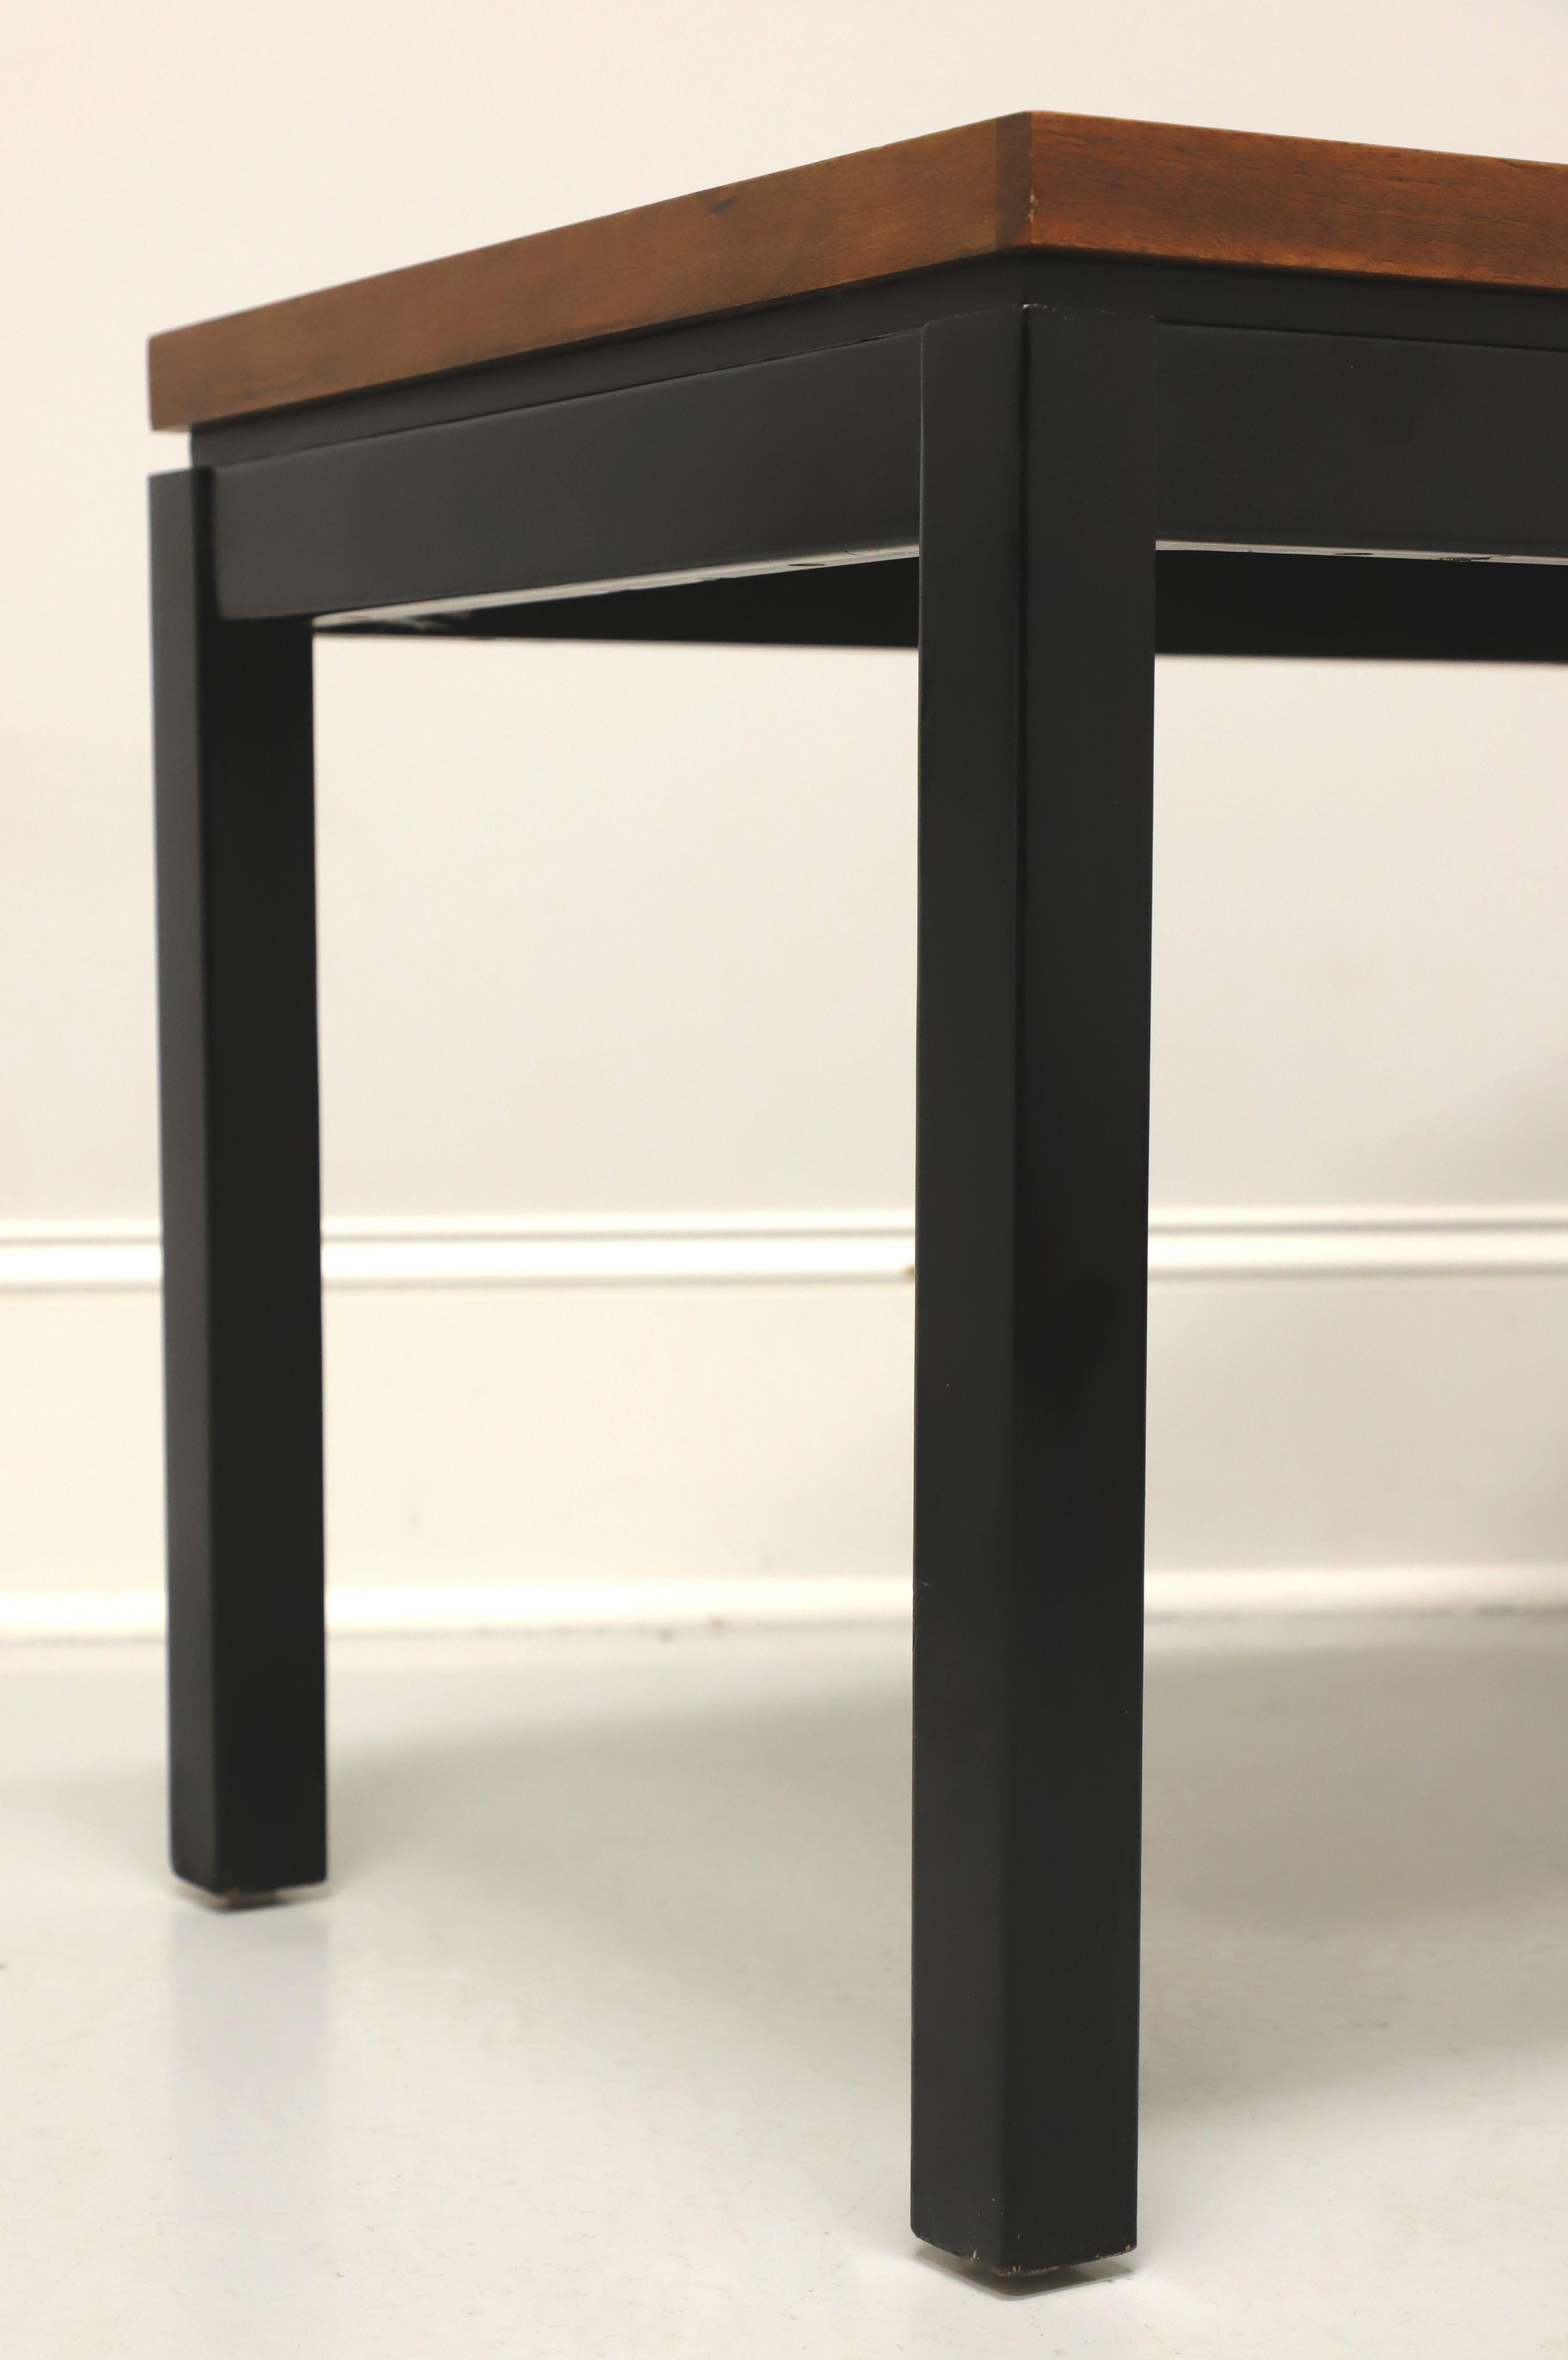 Late 20th Century Black Lacquer & Wood Parquet Side Tables - Pair 3